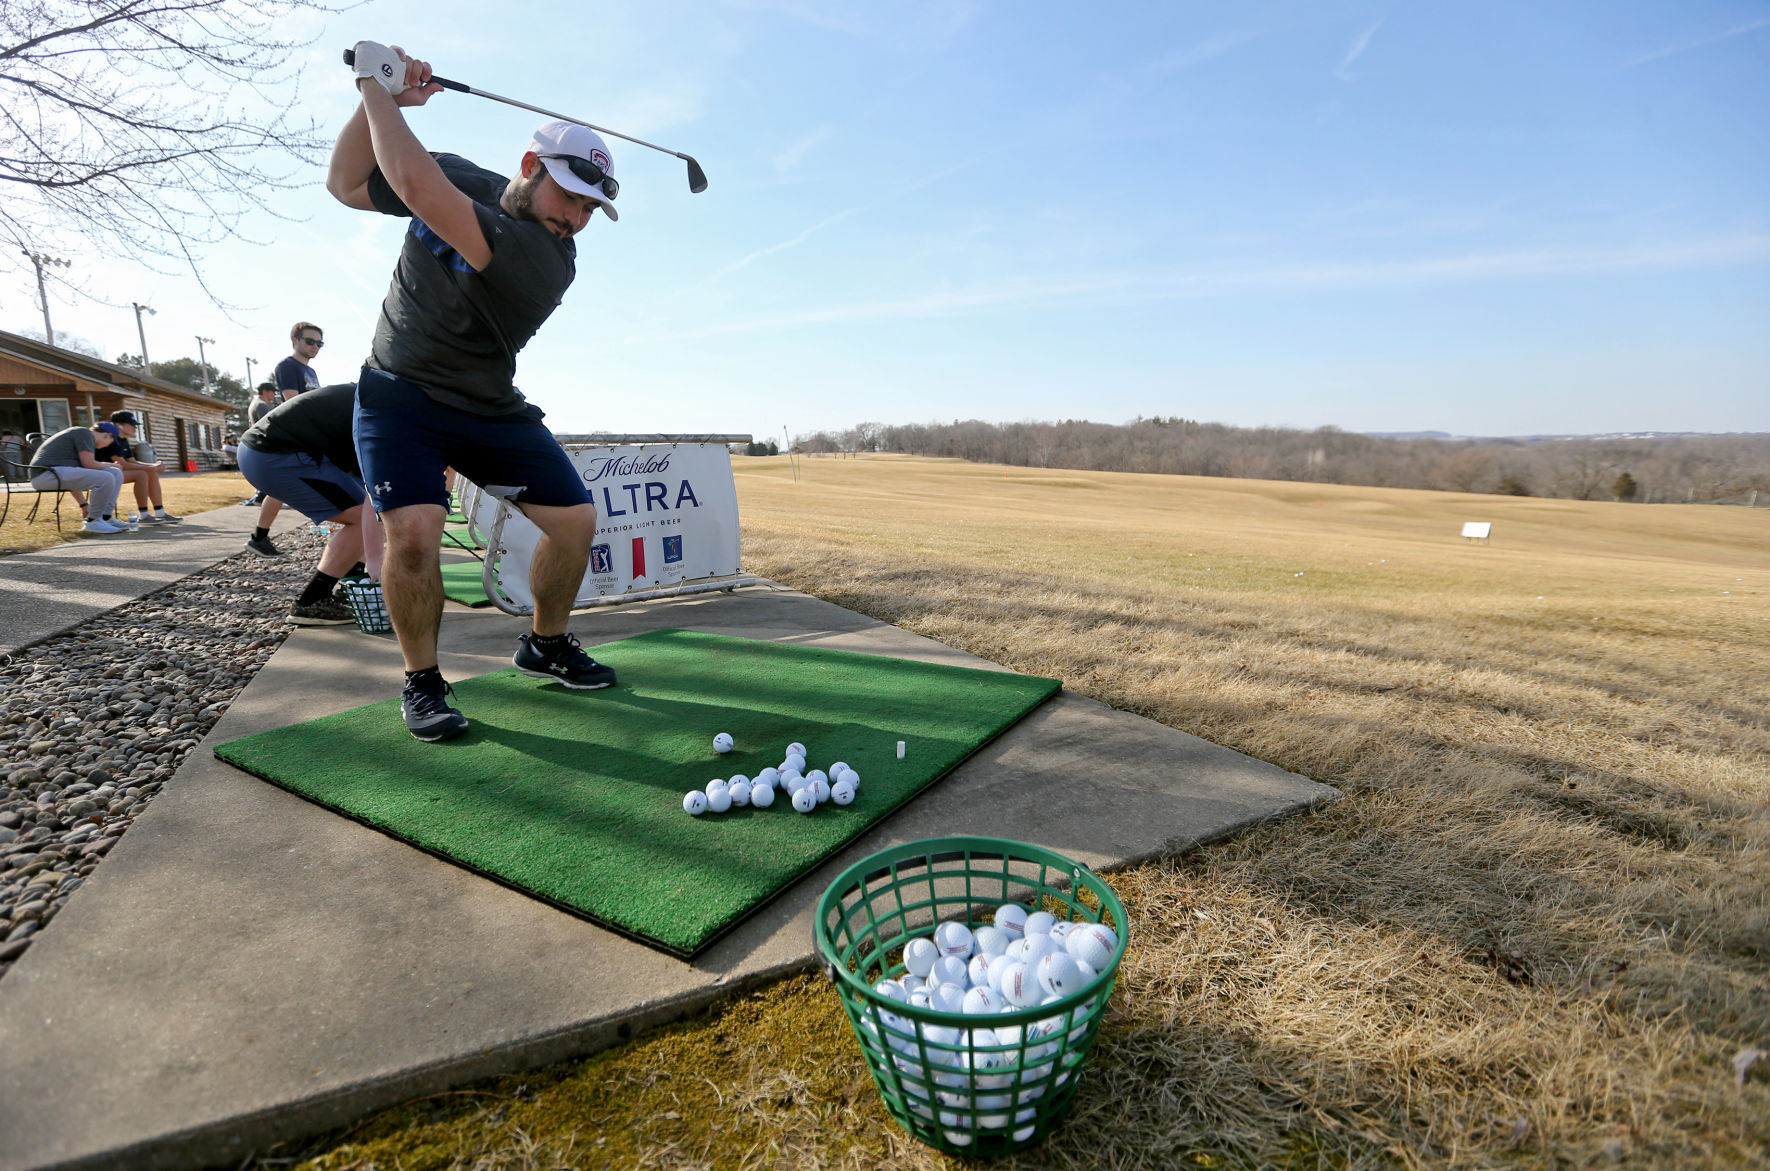 Jerry Jones, a student at the University of Dubuque, hits balls at Derby Grange Golf & Recreation in Dubuque on Wednesday.    PHOTO CREDIT: JESSICA REILLY, Telegraph Herald